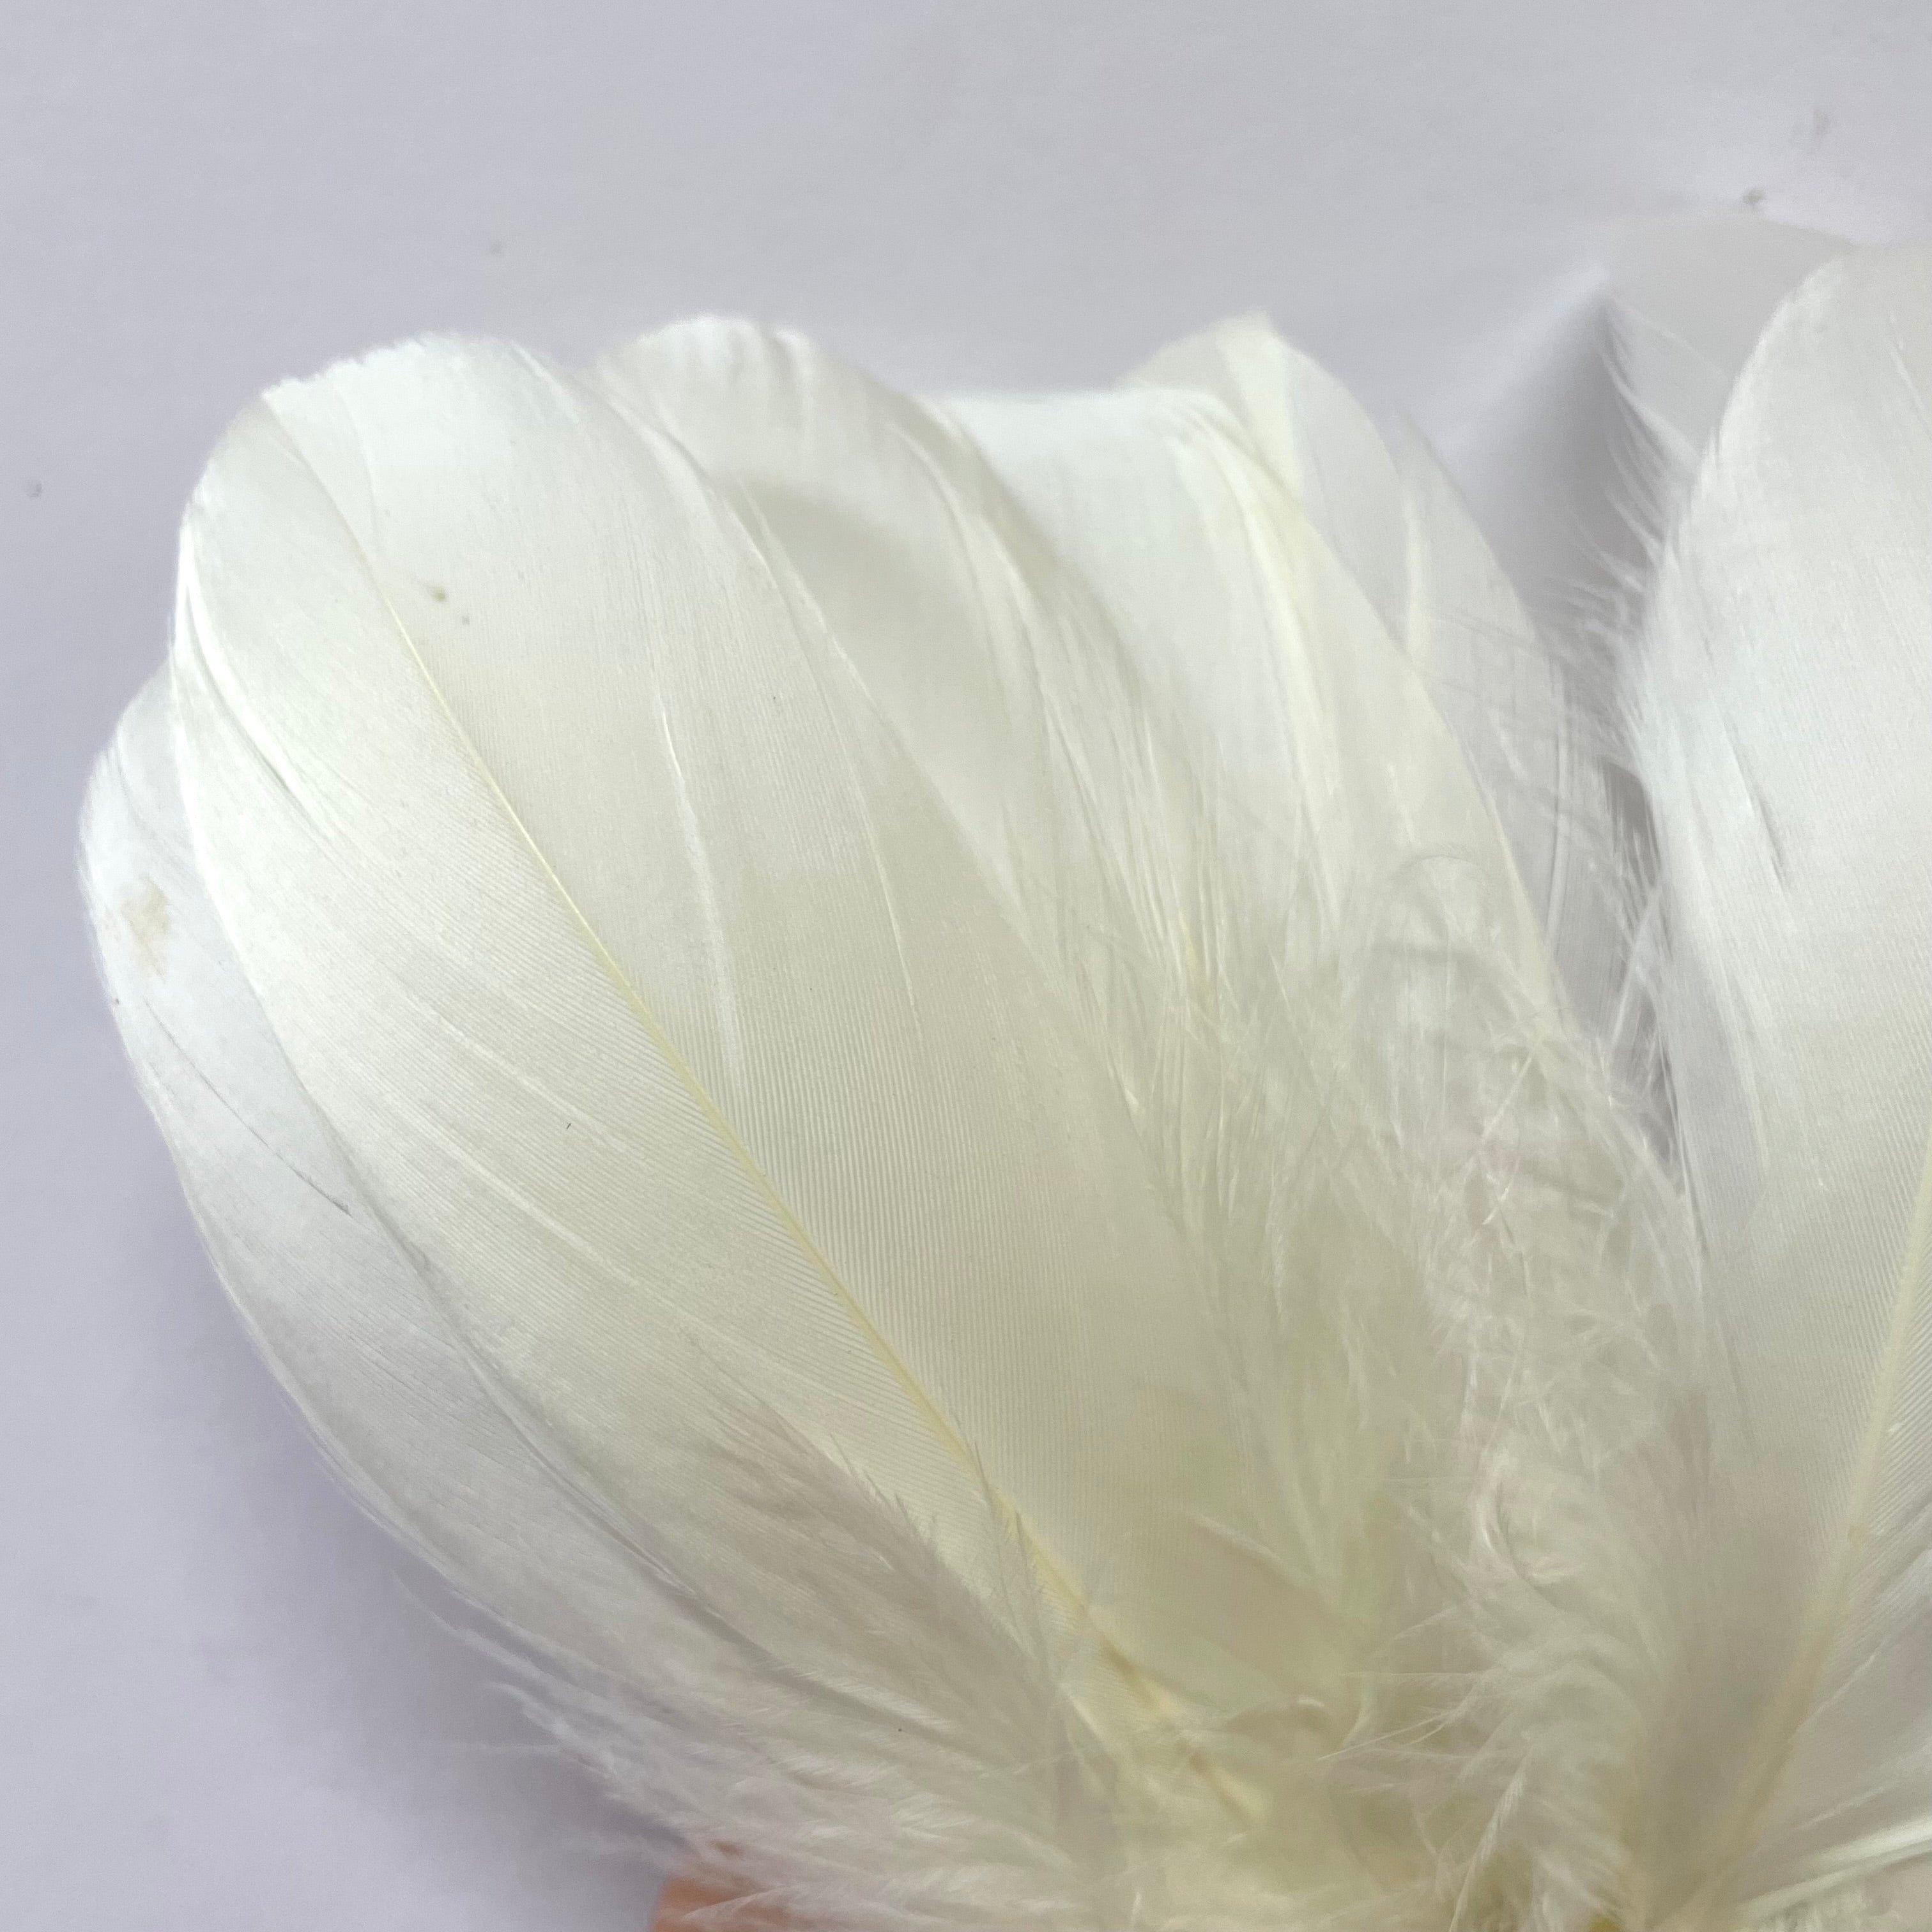 Goose Nagoire Feathers 10 grams - Sorbet